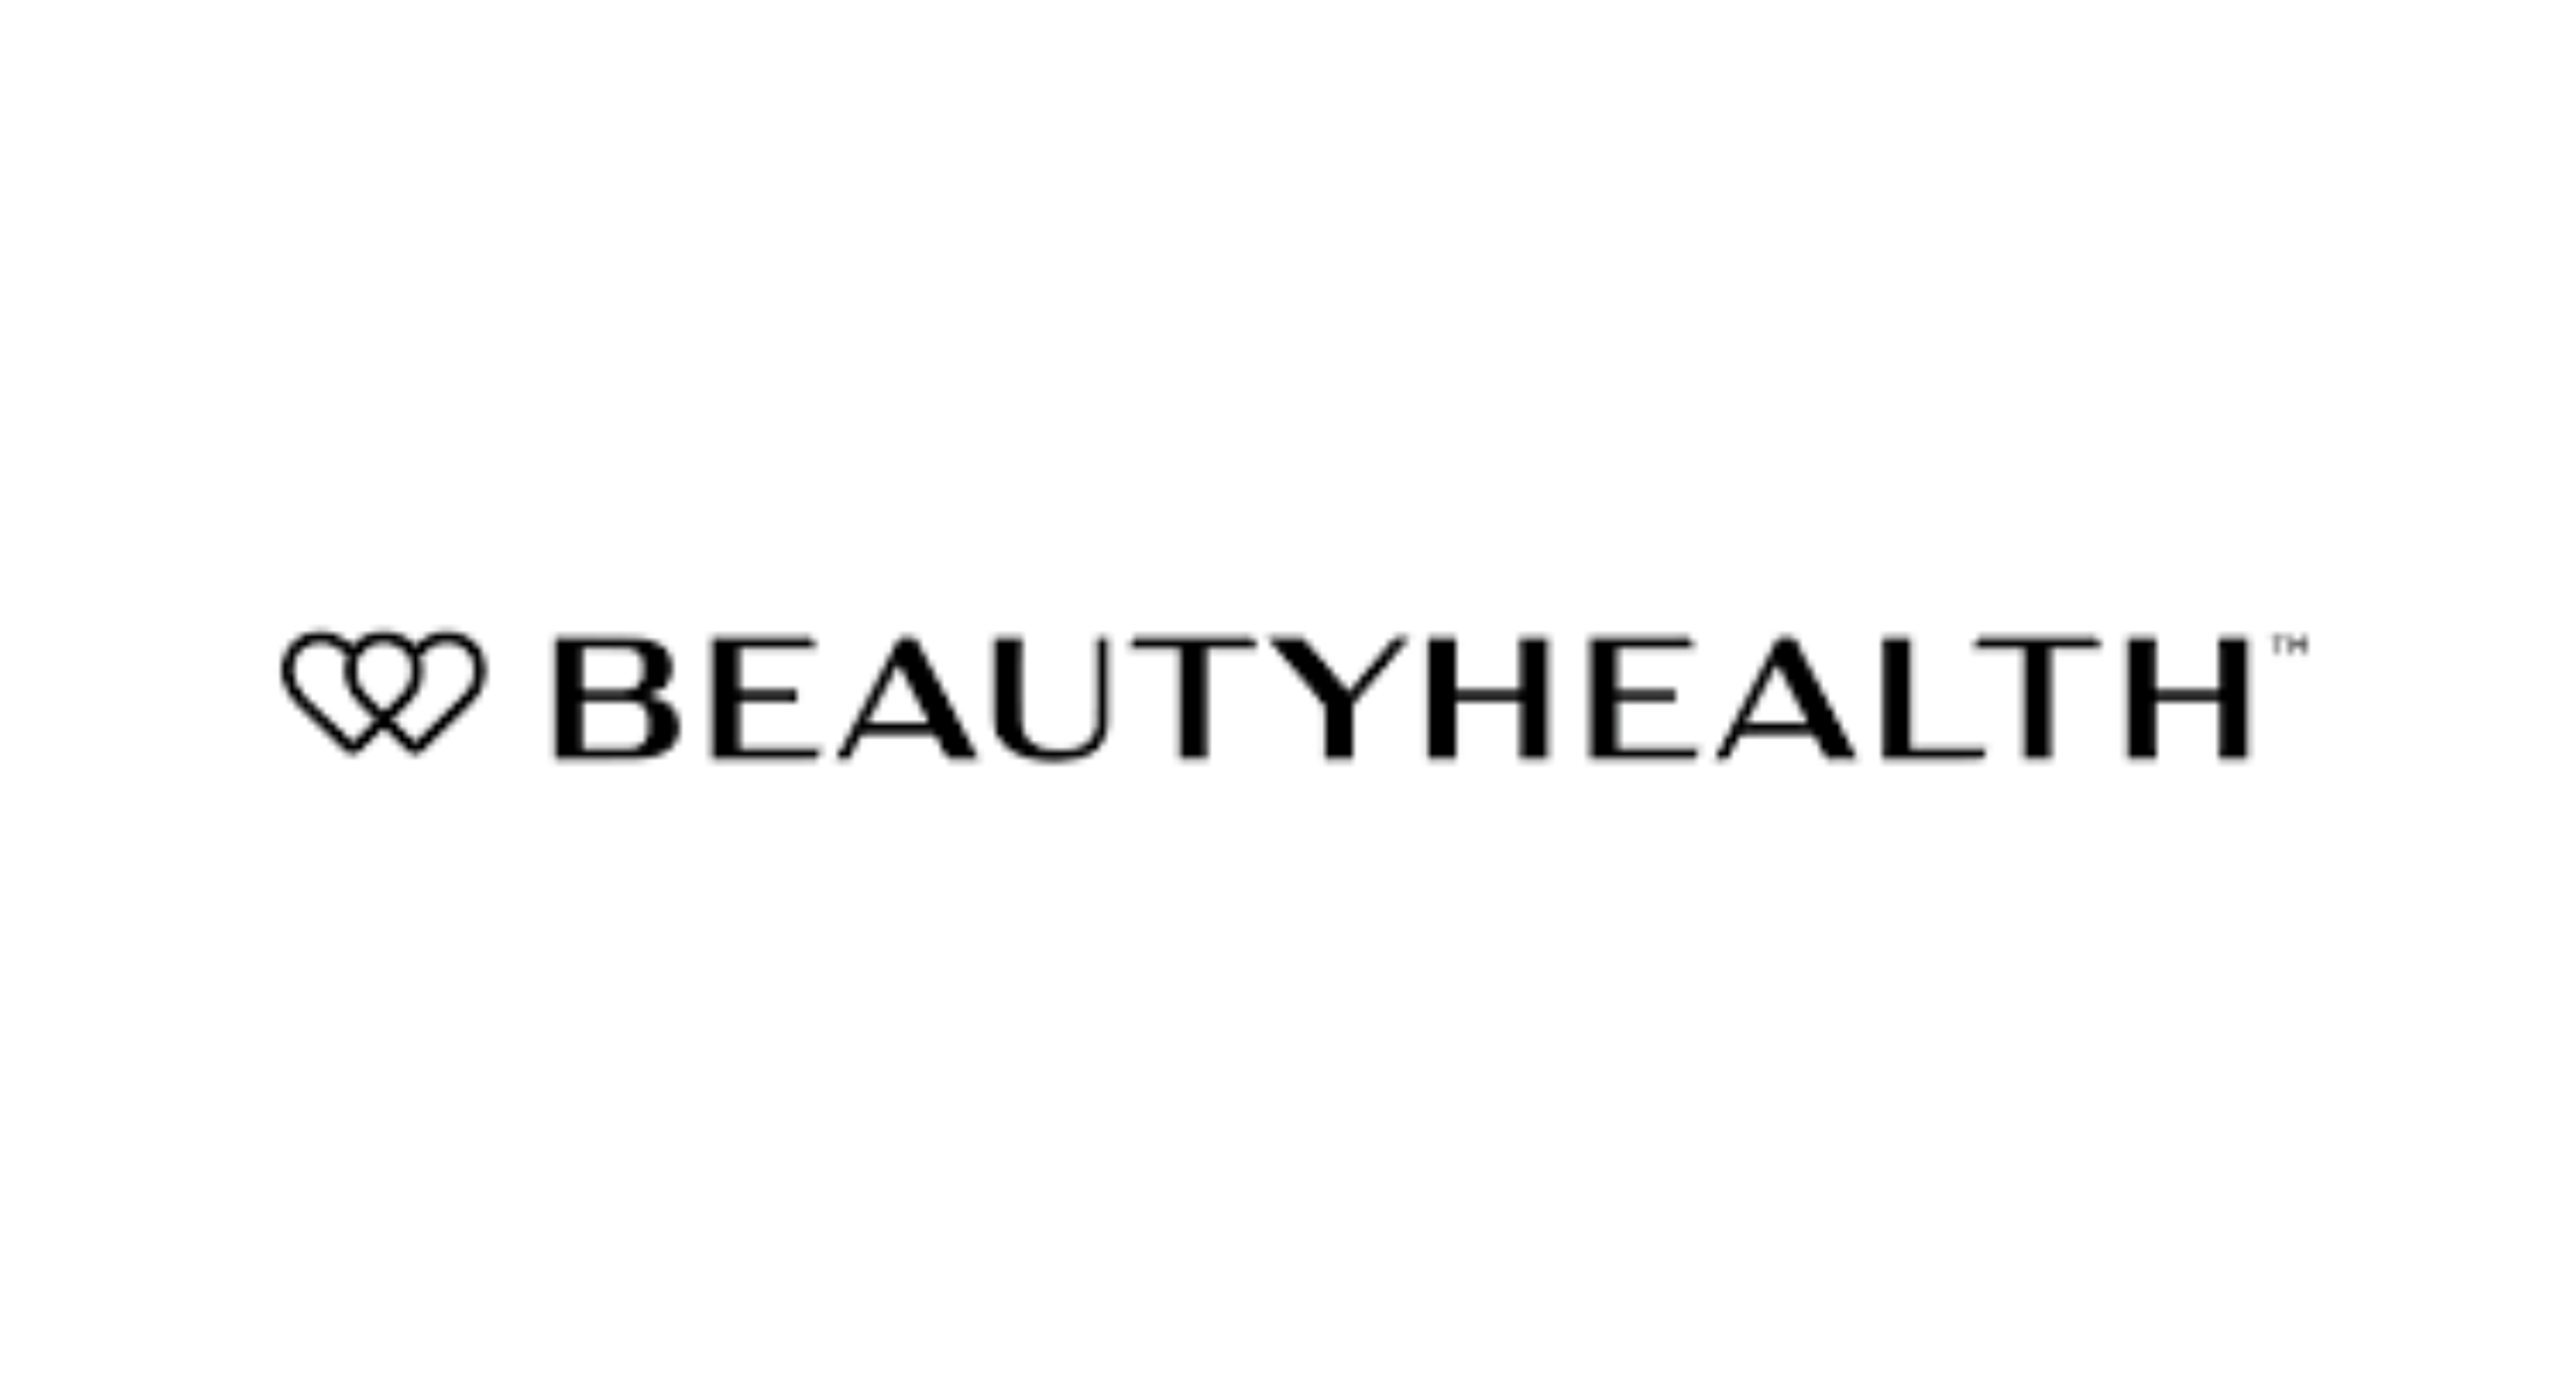 Hydrafacial Brand Owner Beauty Health Plans To Initiate Stock Repurchase Program Next Week